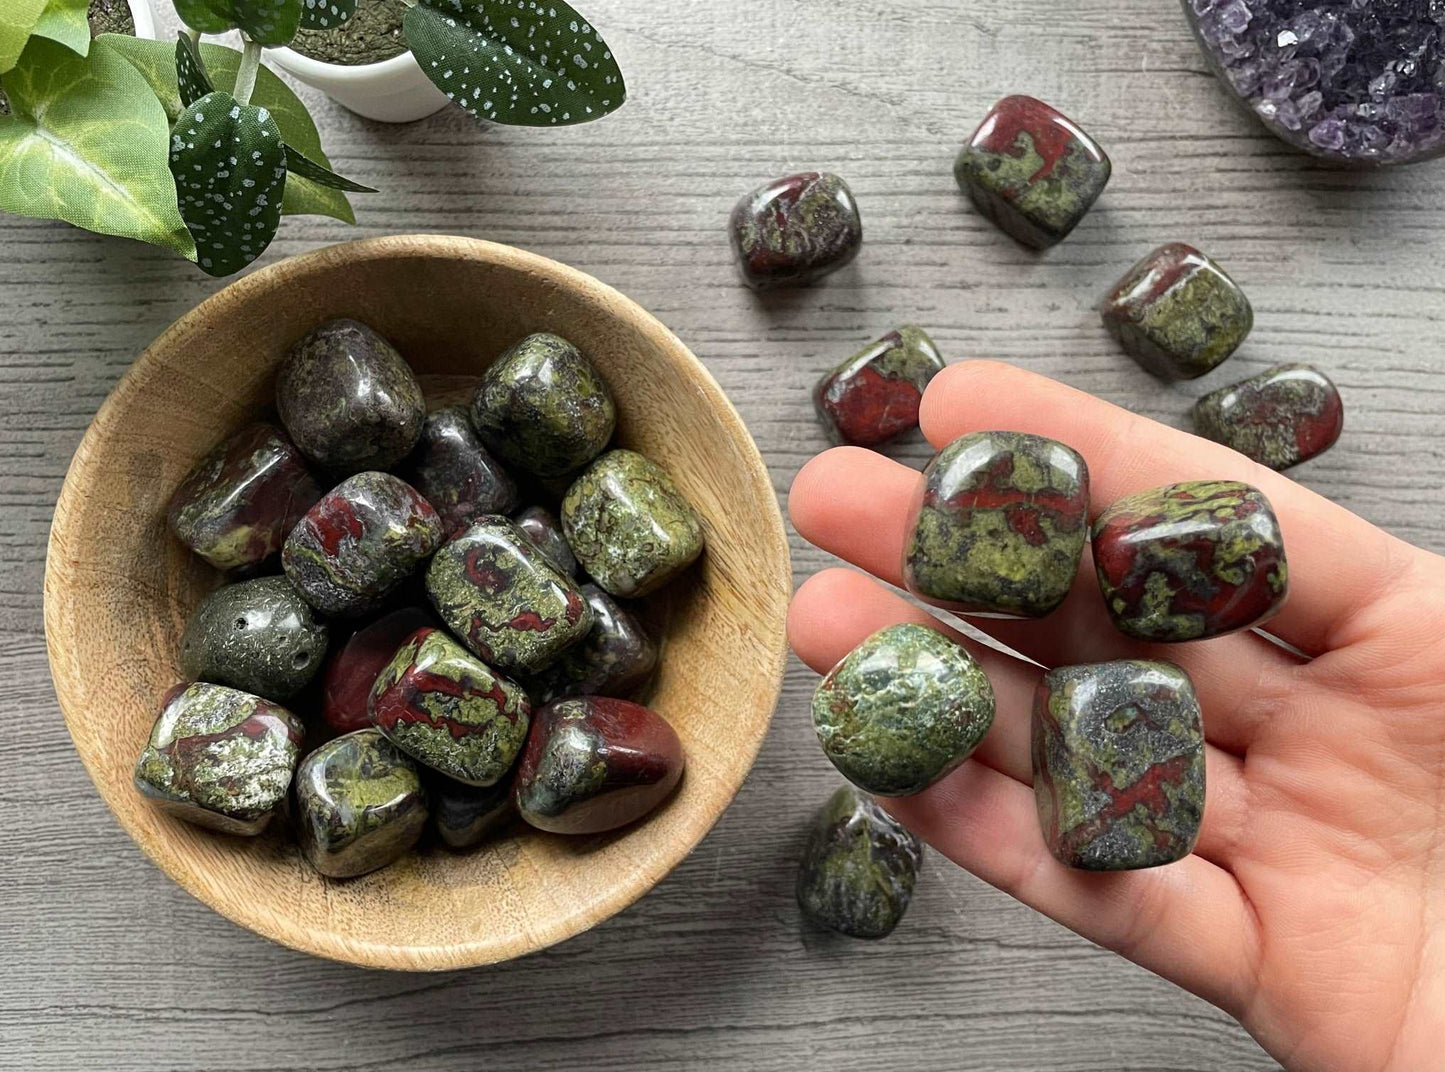 Pictured are various dragon bloodstone tumbled stones.